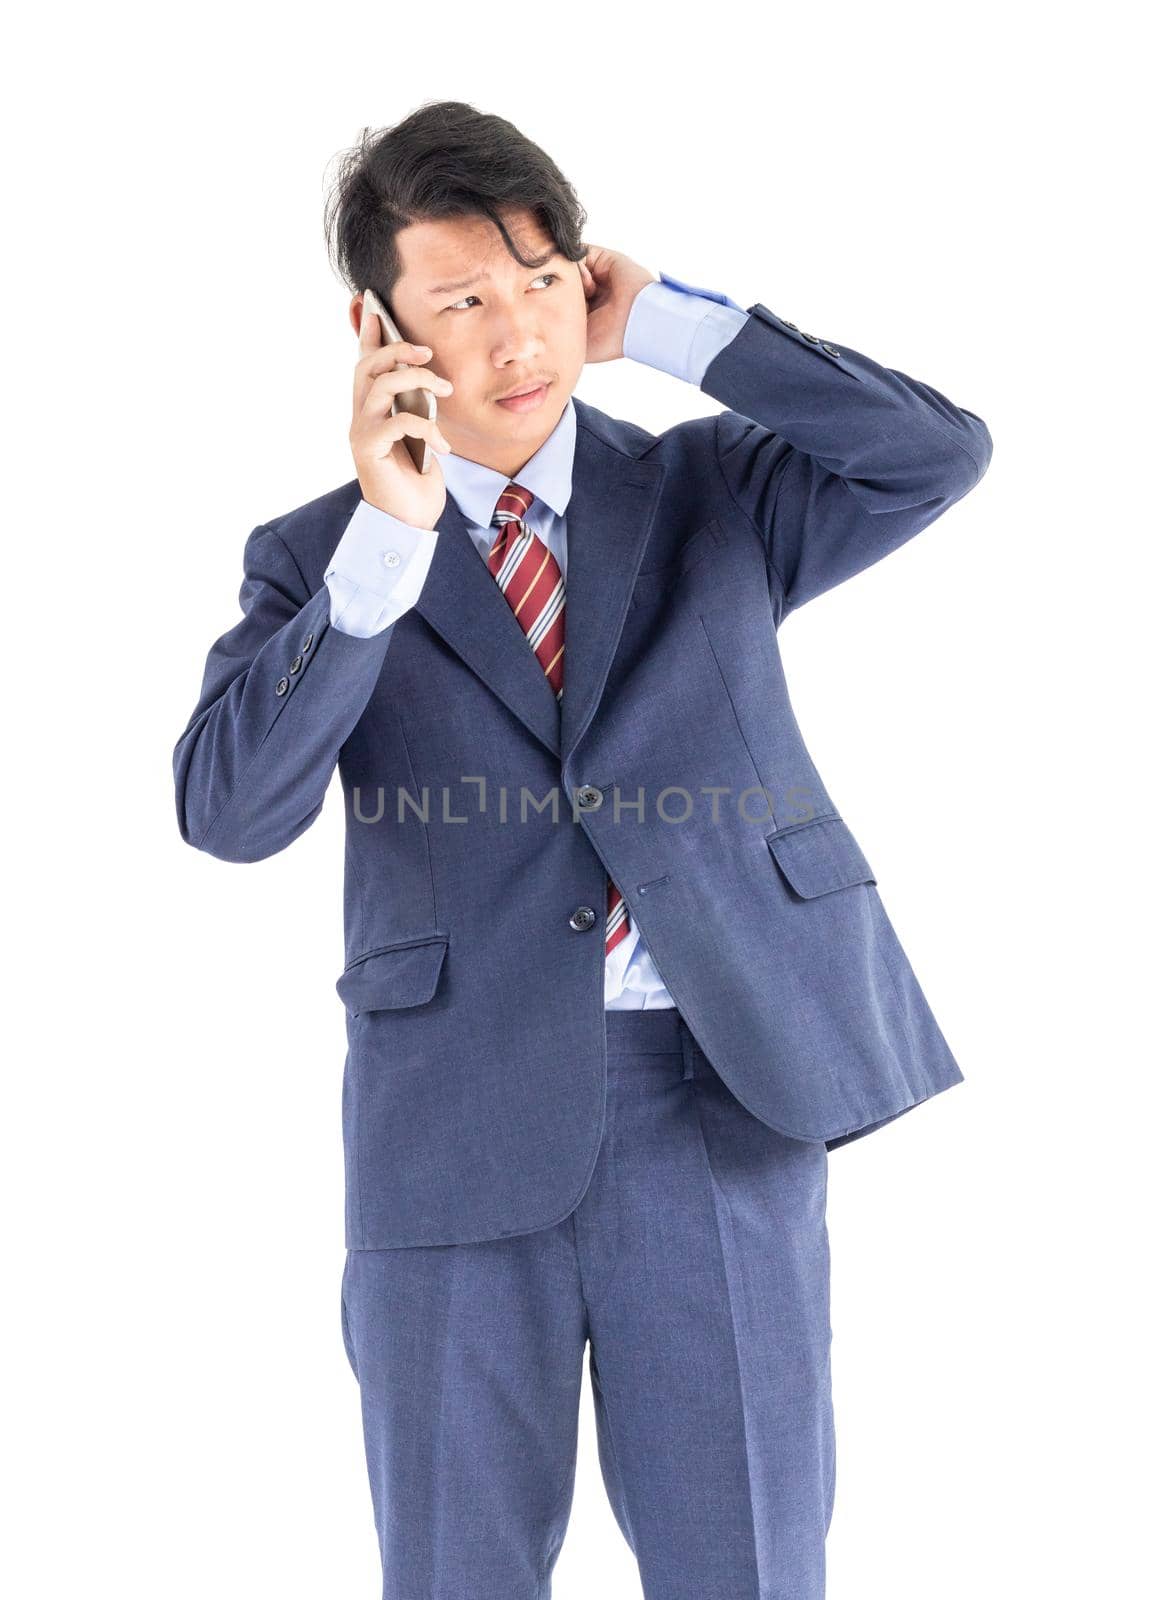 Business men portrait holding phone isolated on white by stoonn